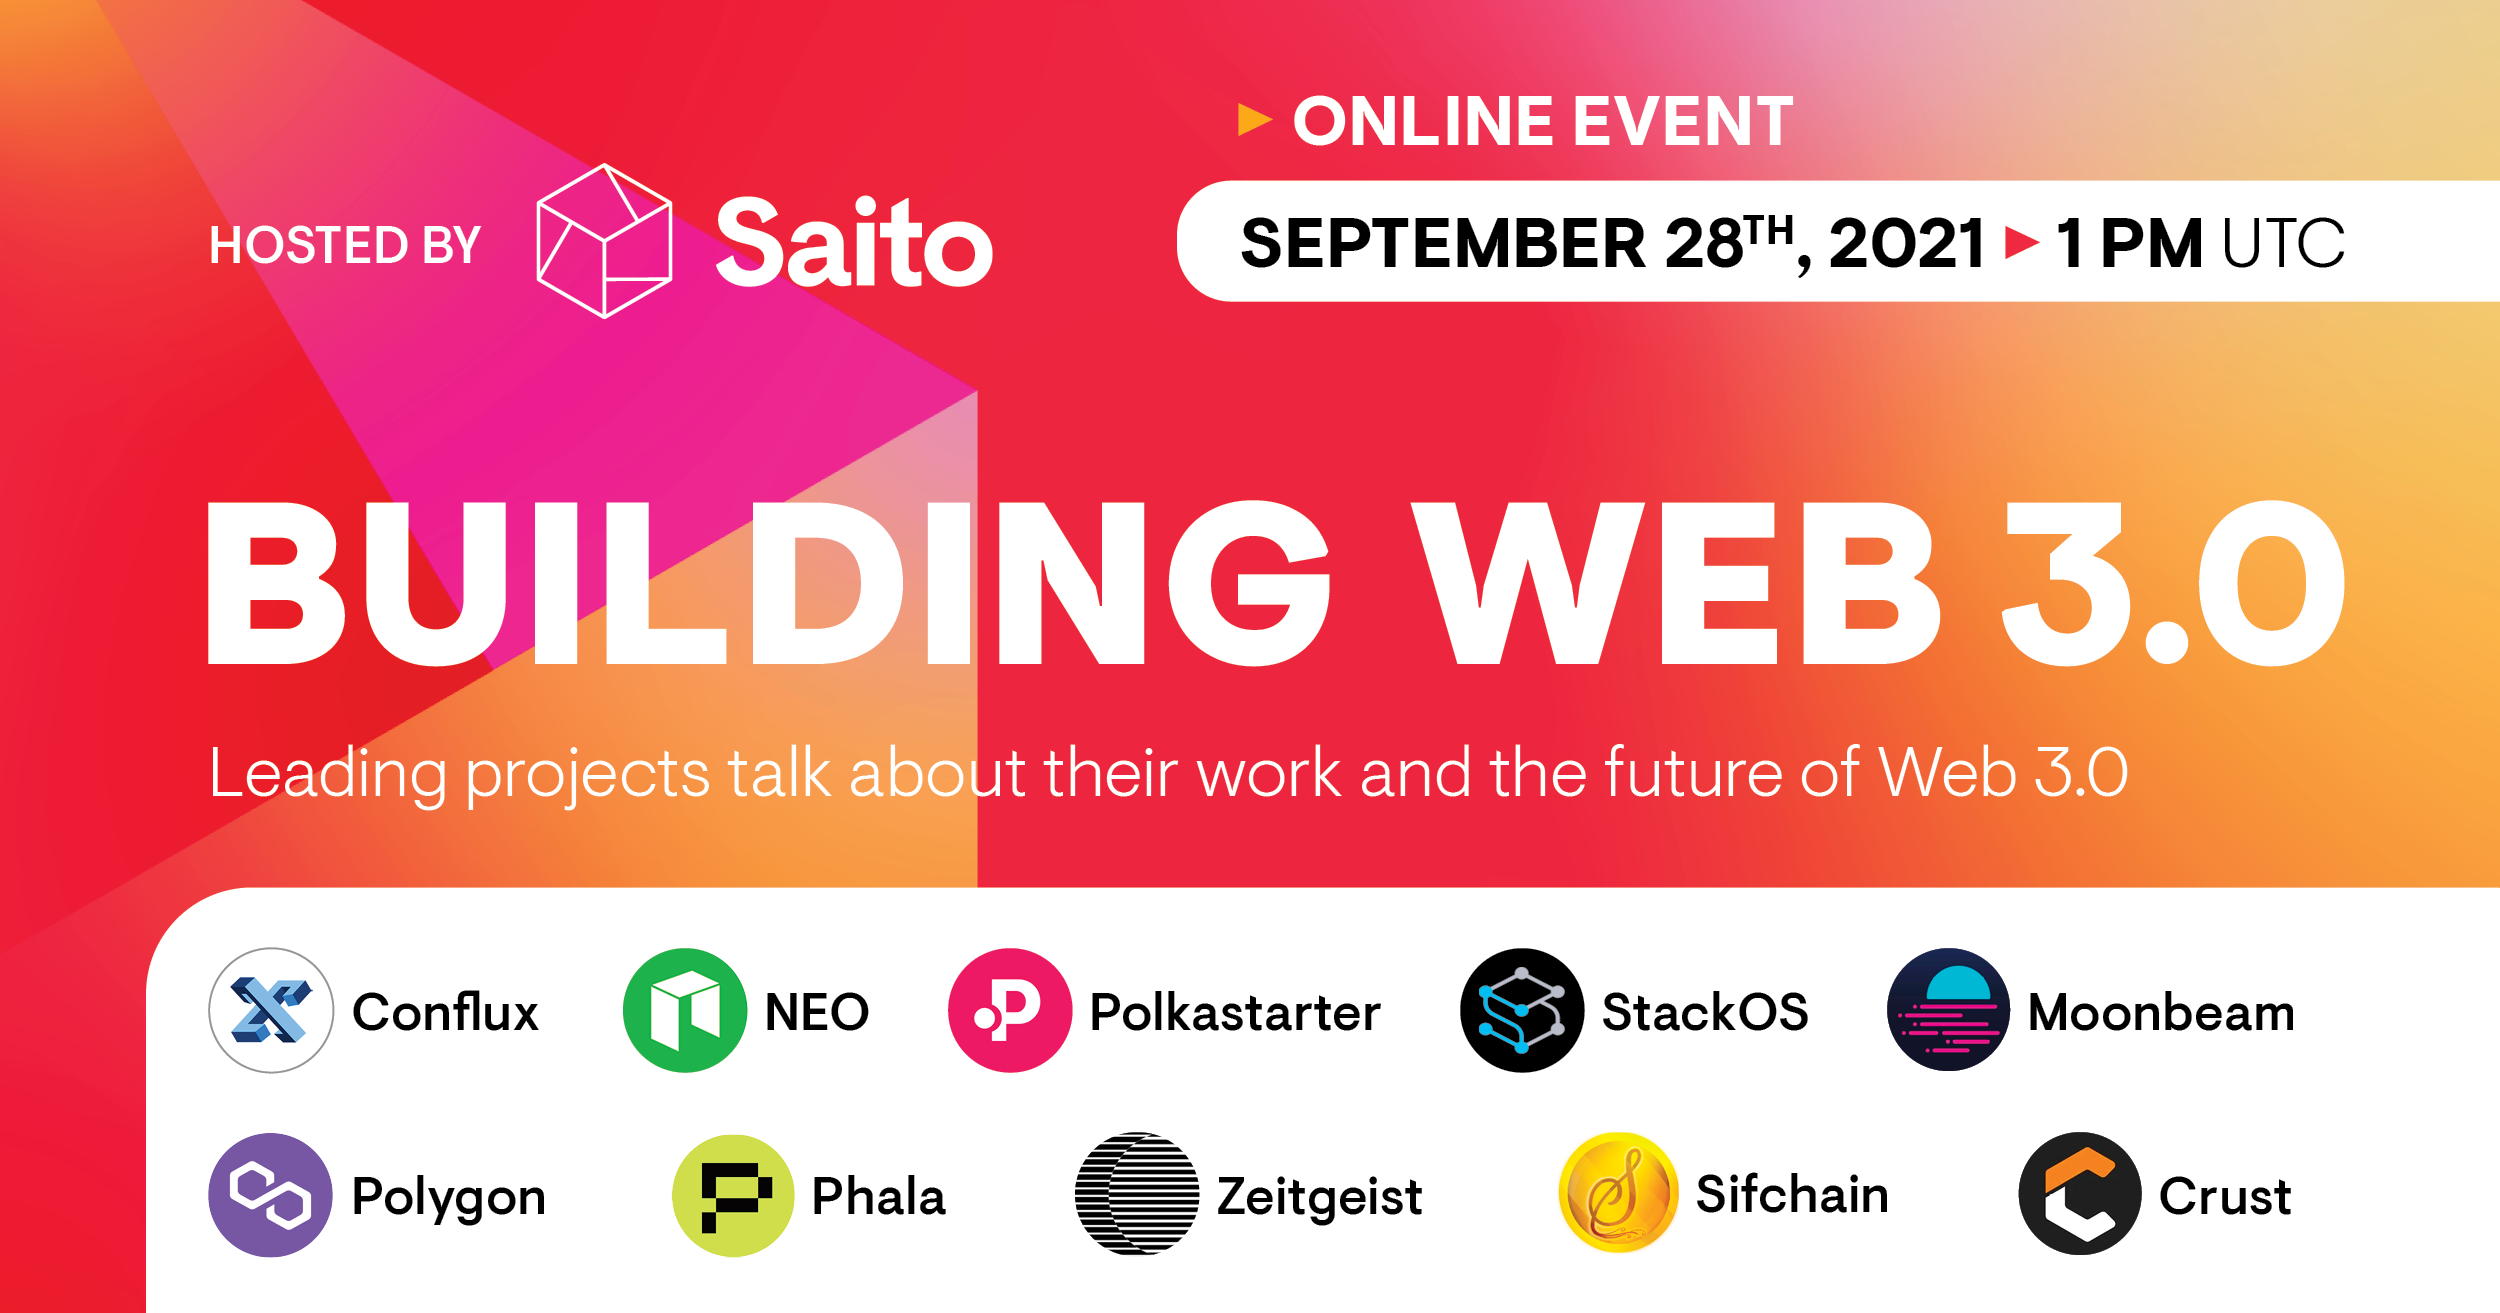 The event aims to gather ecosystem projects who are actively building Web 3.0 to discuss progress and the future of Web 3.0. The event will also be a 